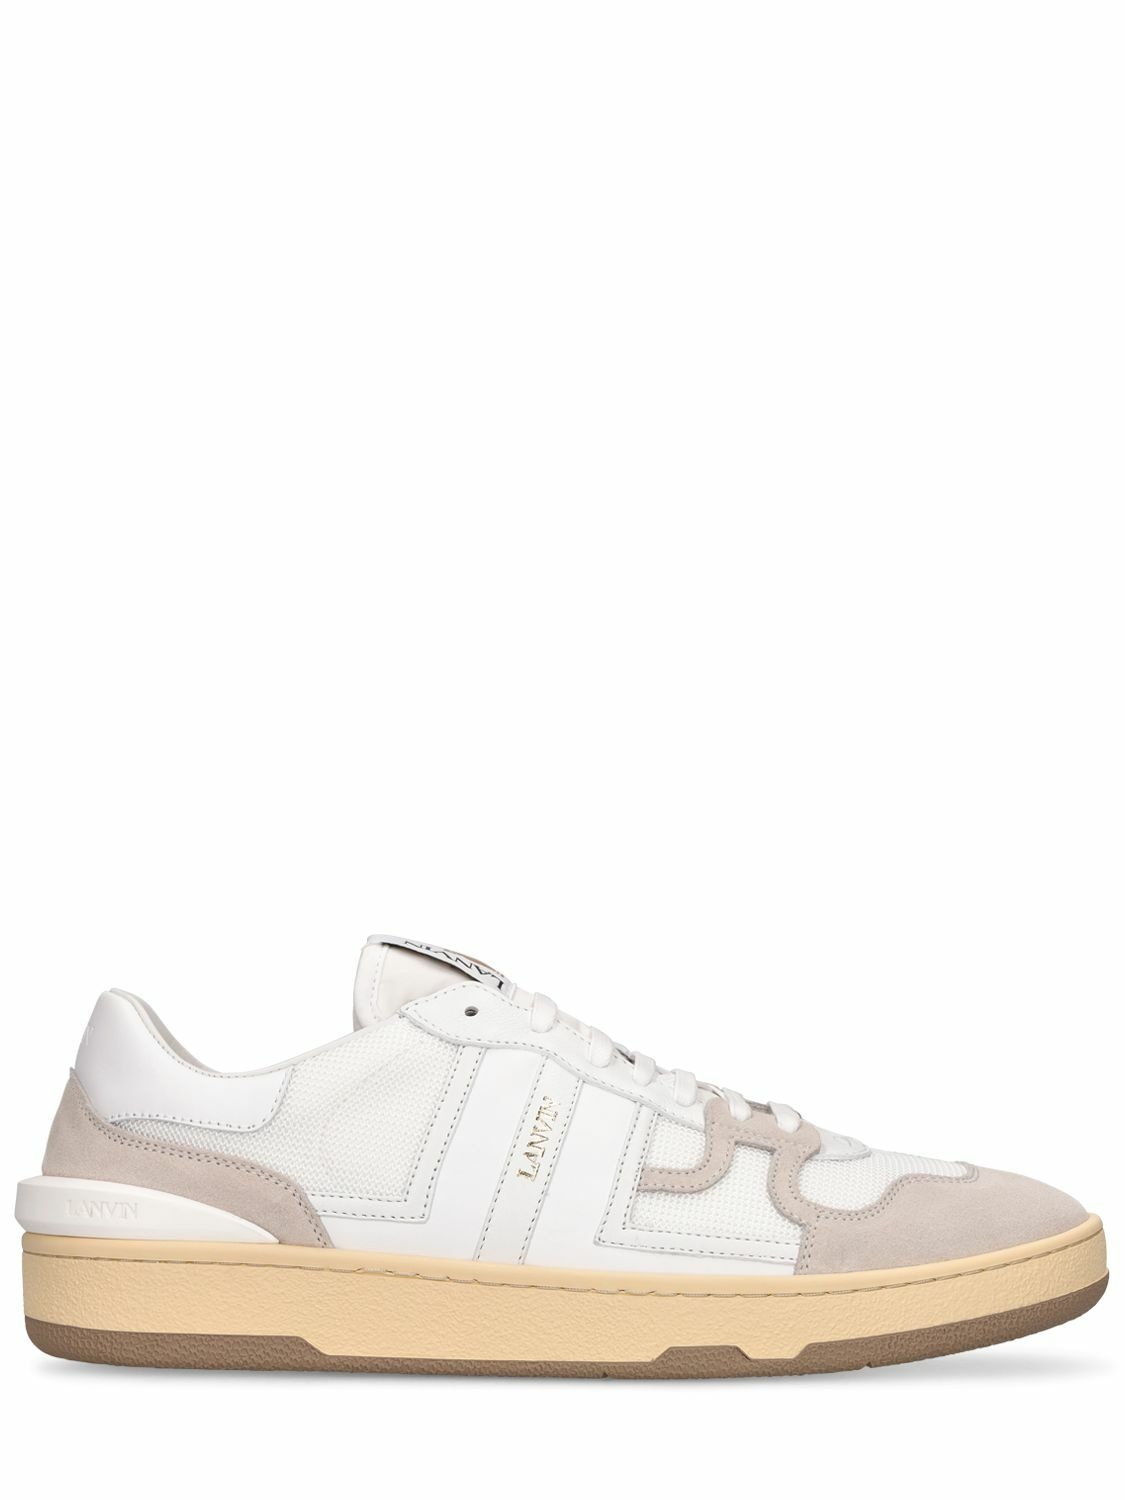 Photo: LANVIN - Clay Leather & Mesh Low-top Sneakers